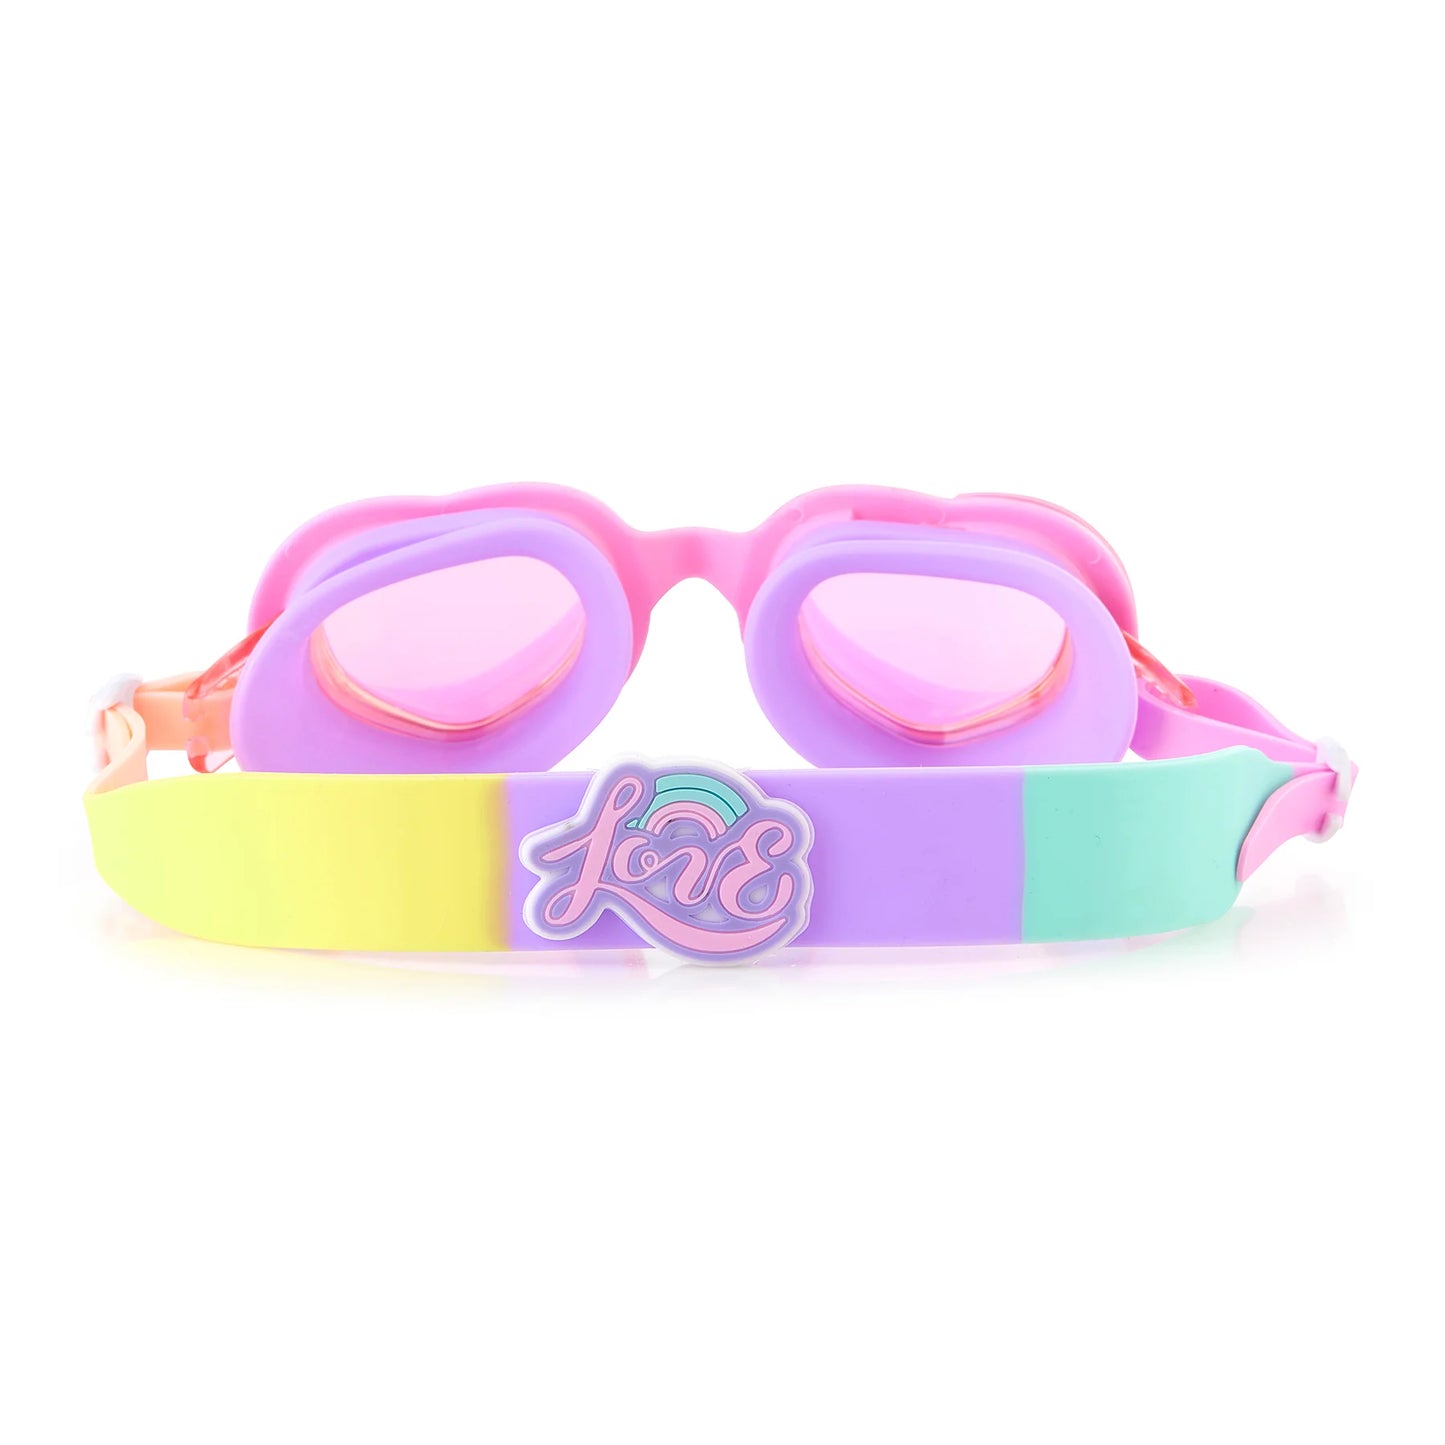 Pink All You Need is Love Swim Goggles  - Doodlebug's Children's Boutique